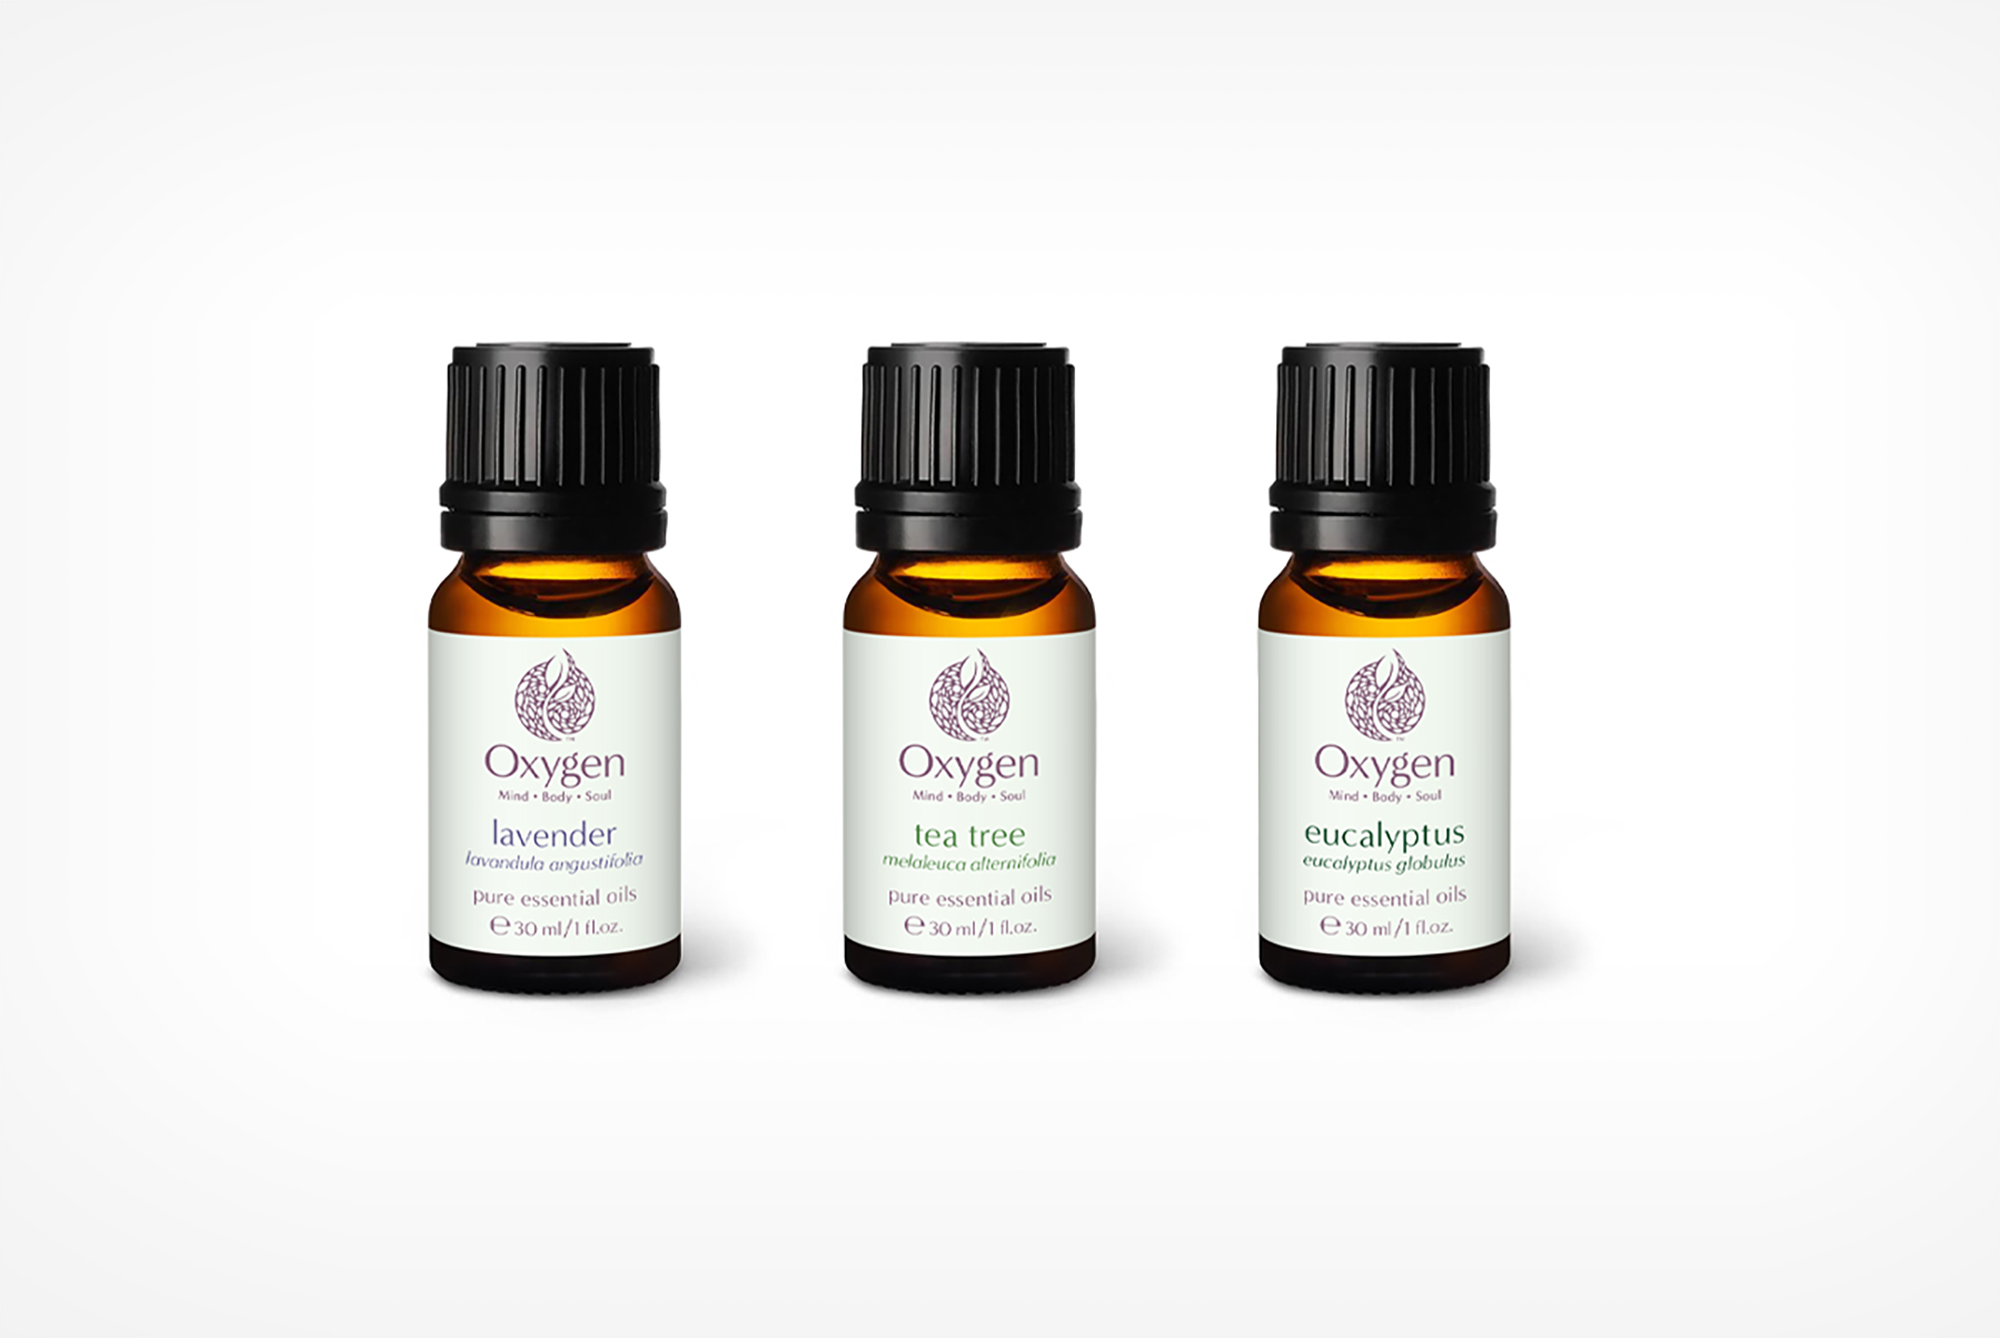 Brand label designs for Oxygen Wellness pure essential oils line of products.